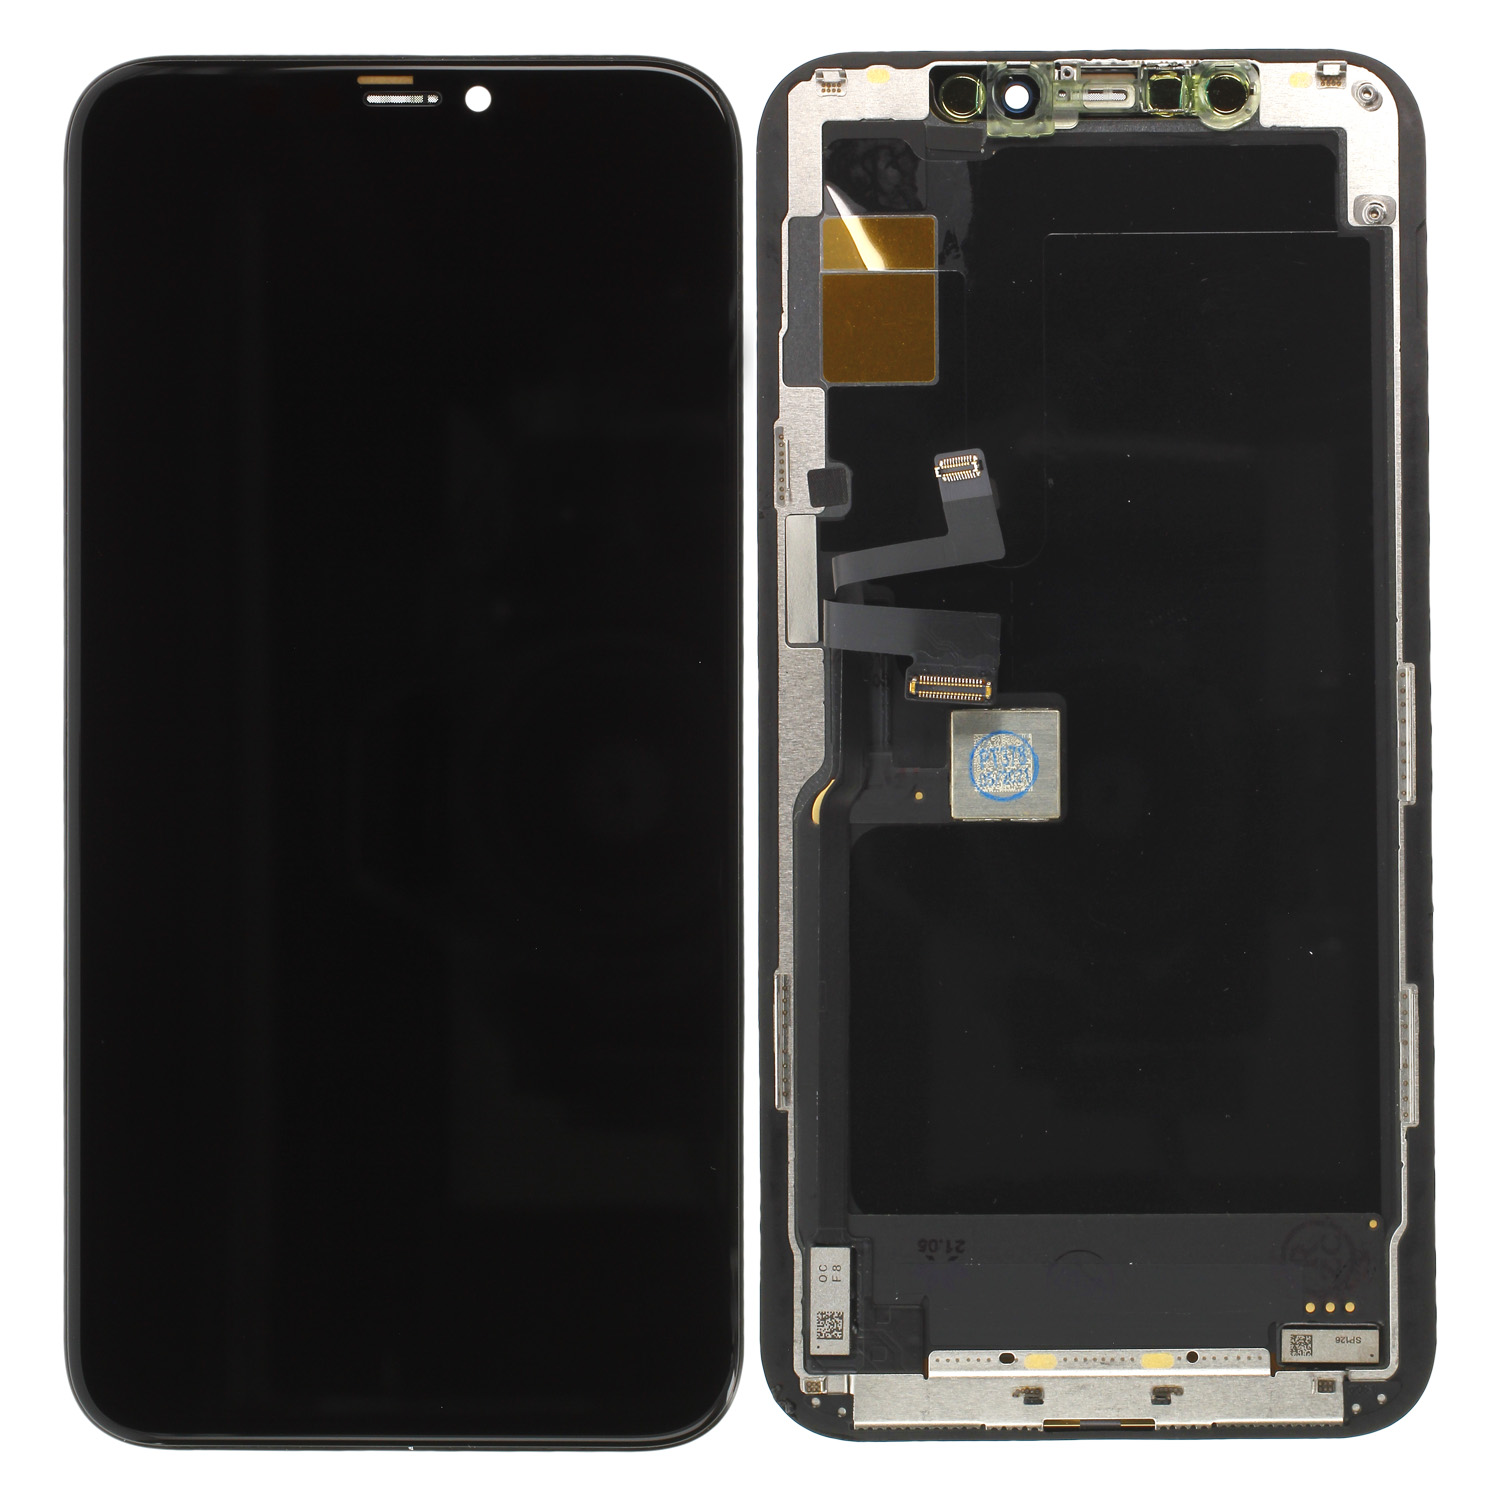 LCD Display compatible with iPhone 11 Pro, Black Soft-OLED (LG-Version)